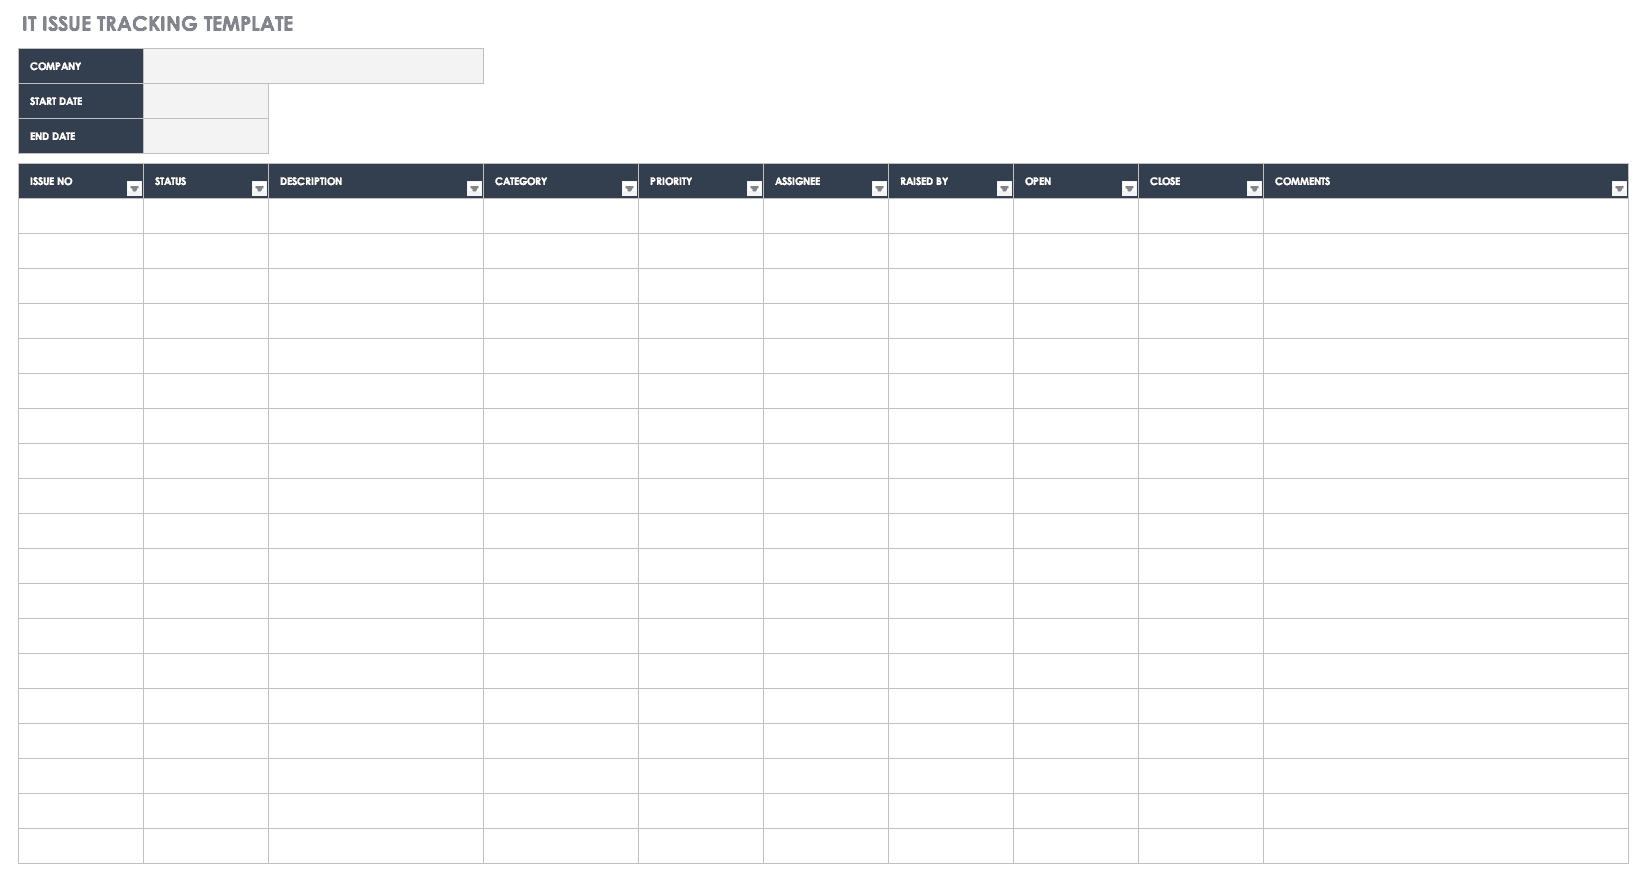 IT Issue Tracking Template